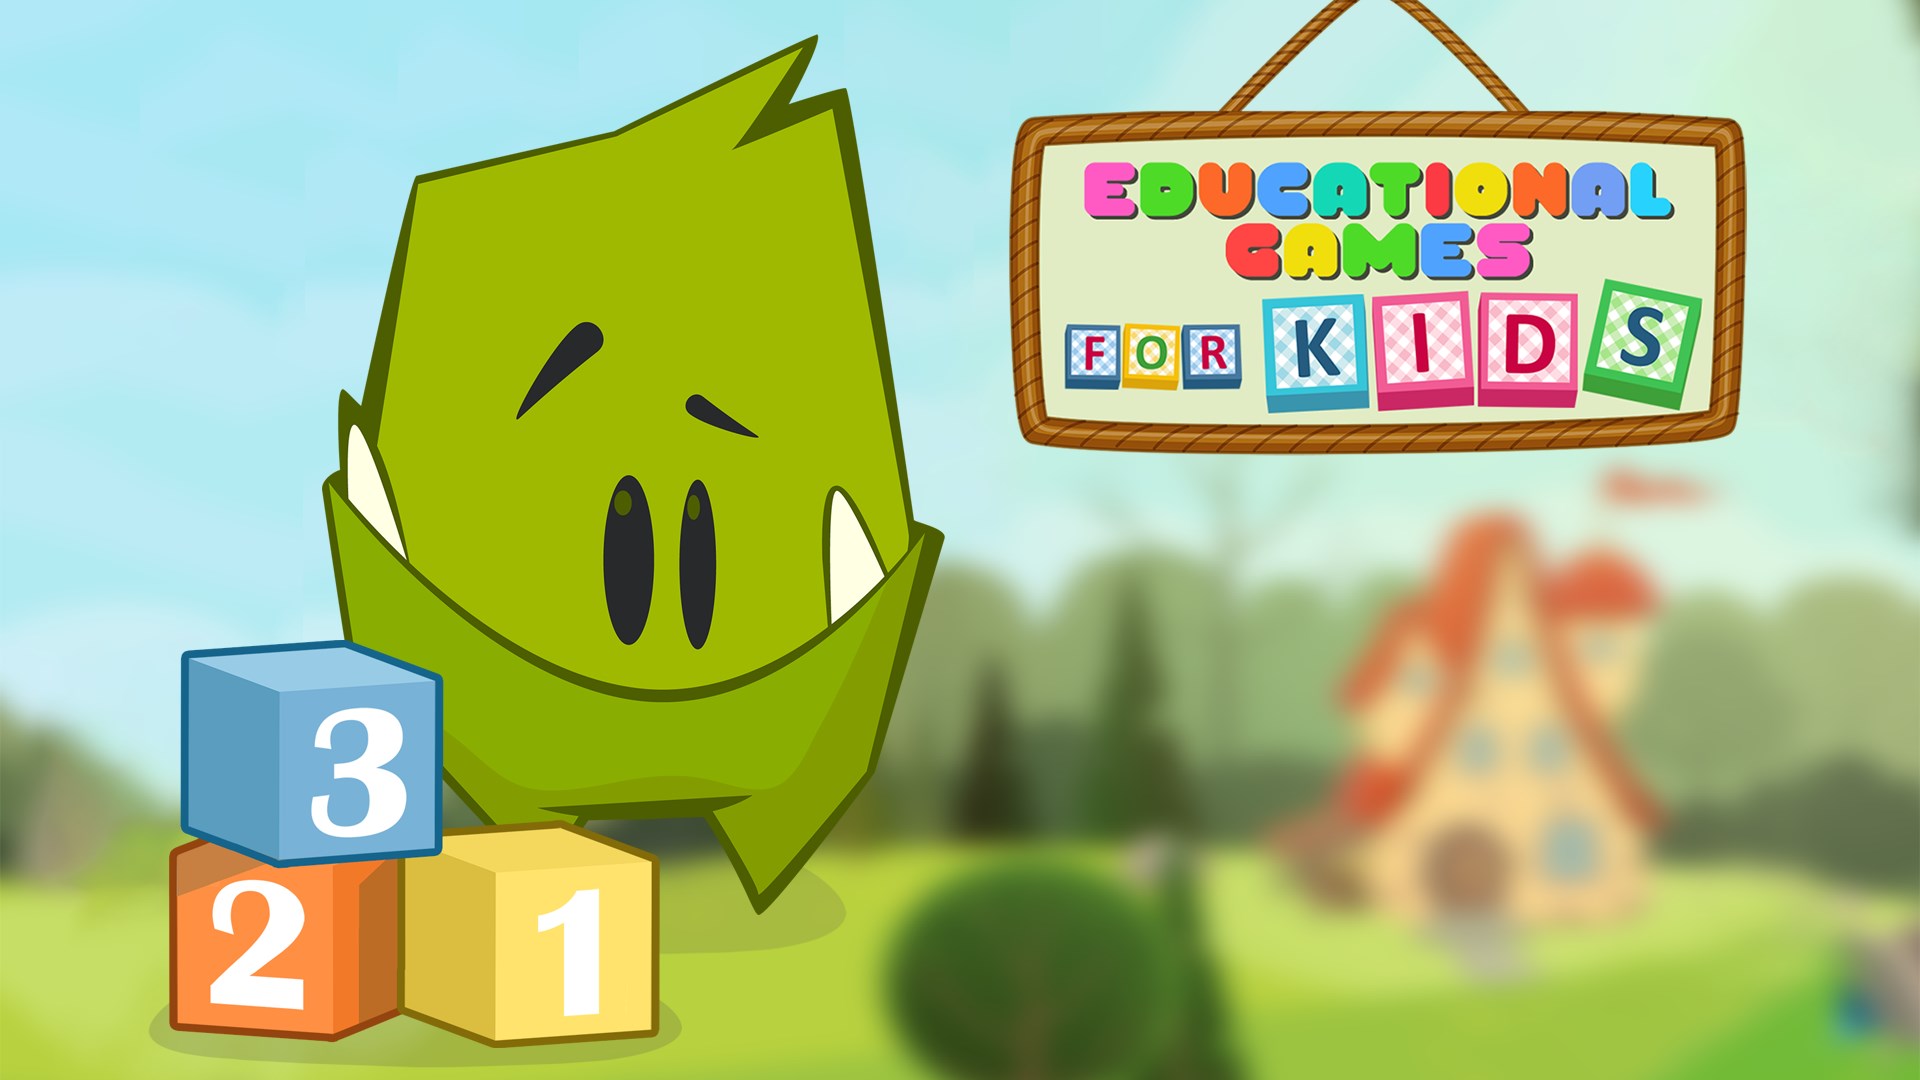 Educational Games For Kids Is Now 